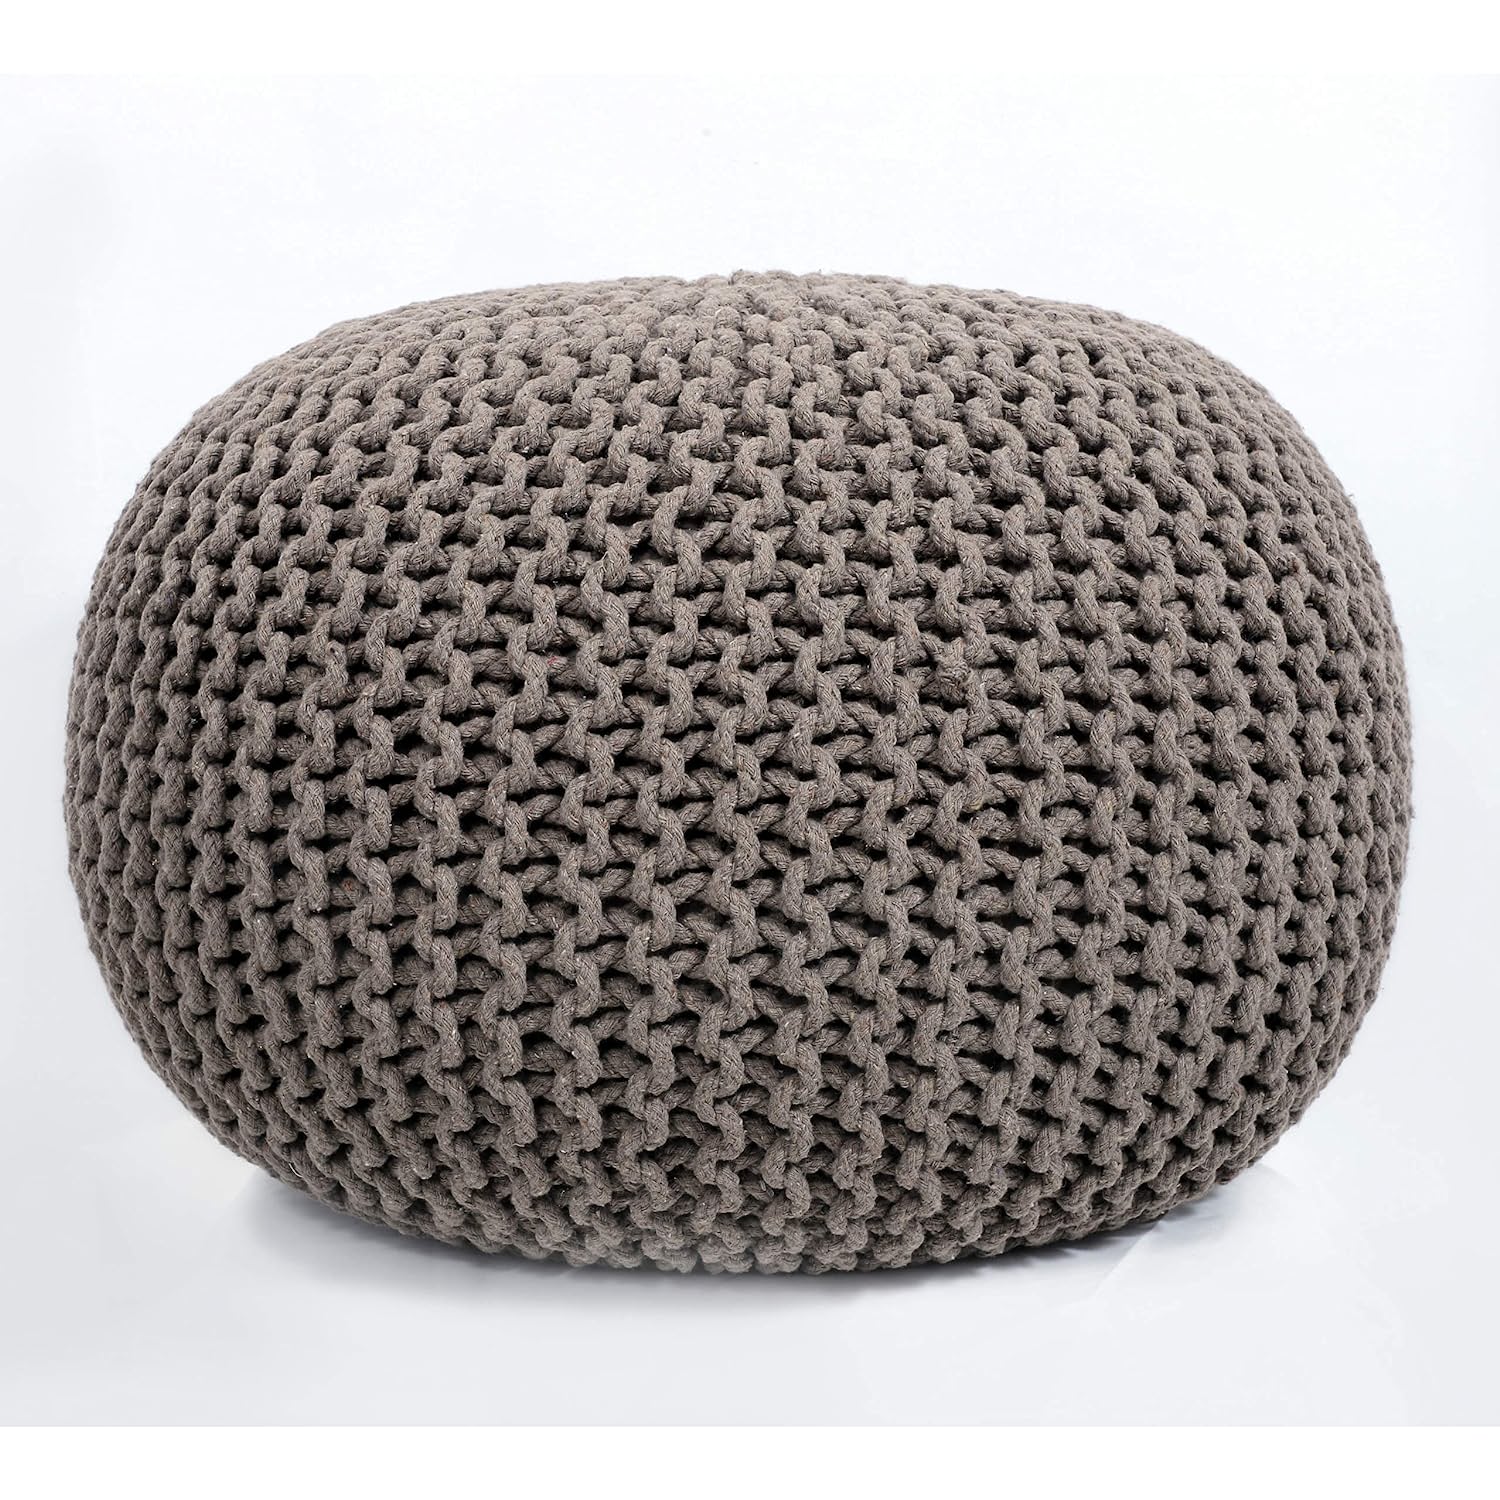 Hand Knitted Cotton Ottoman Pouf Footrest – BlessMyBucket